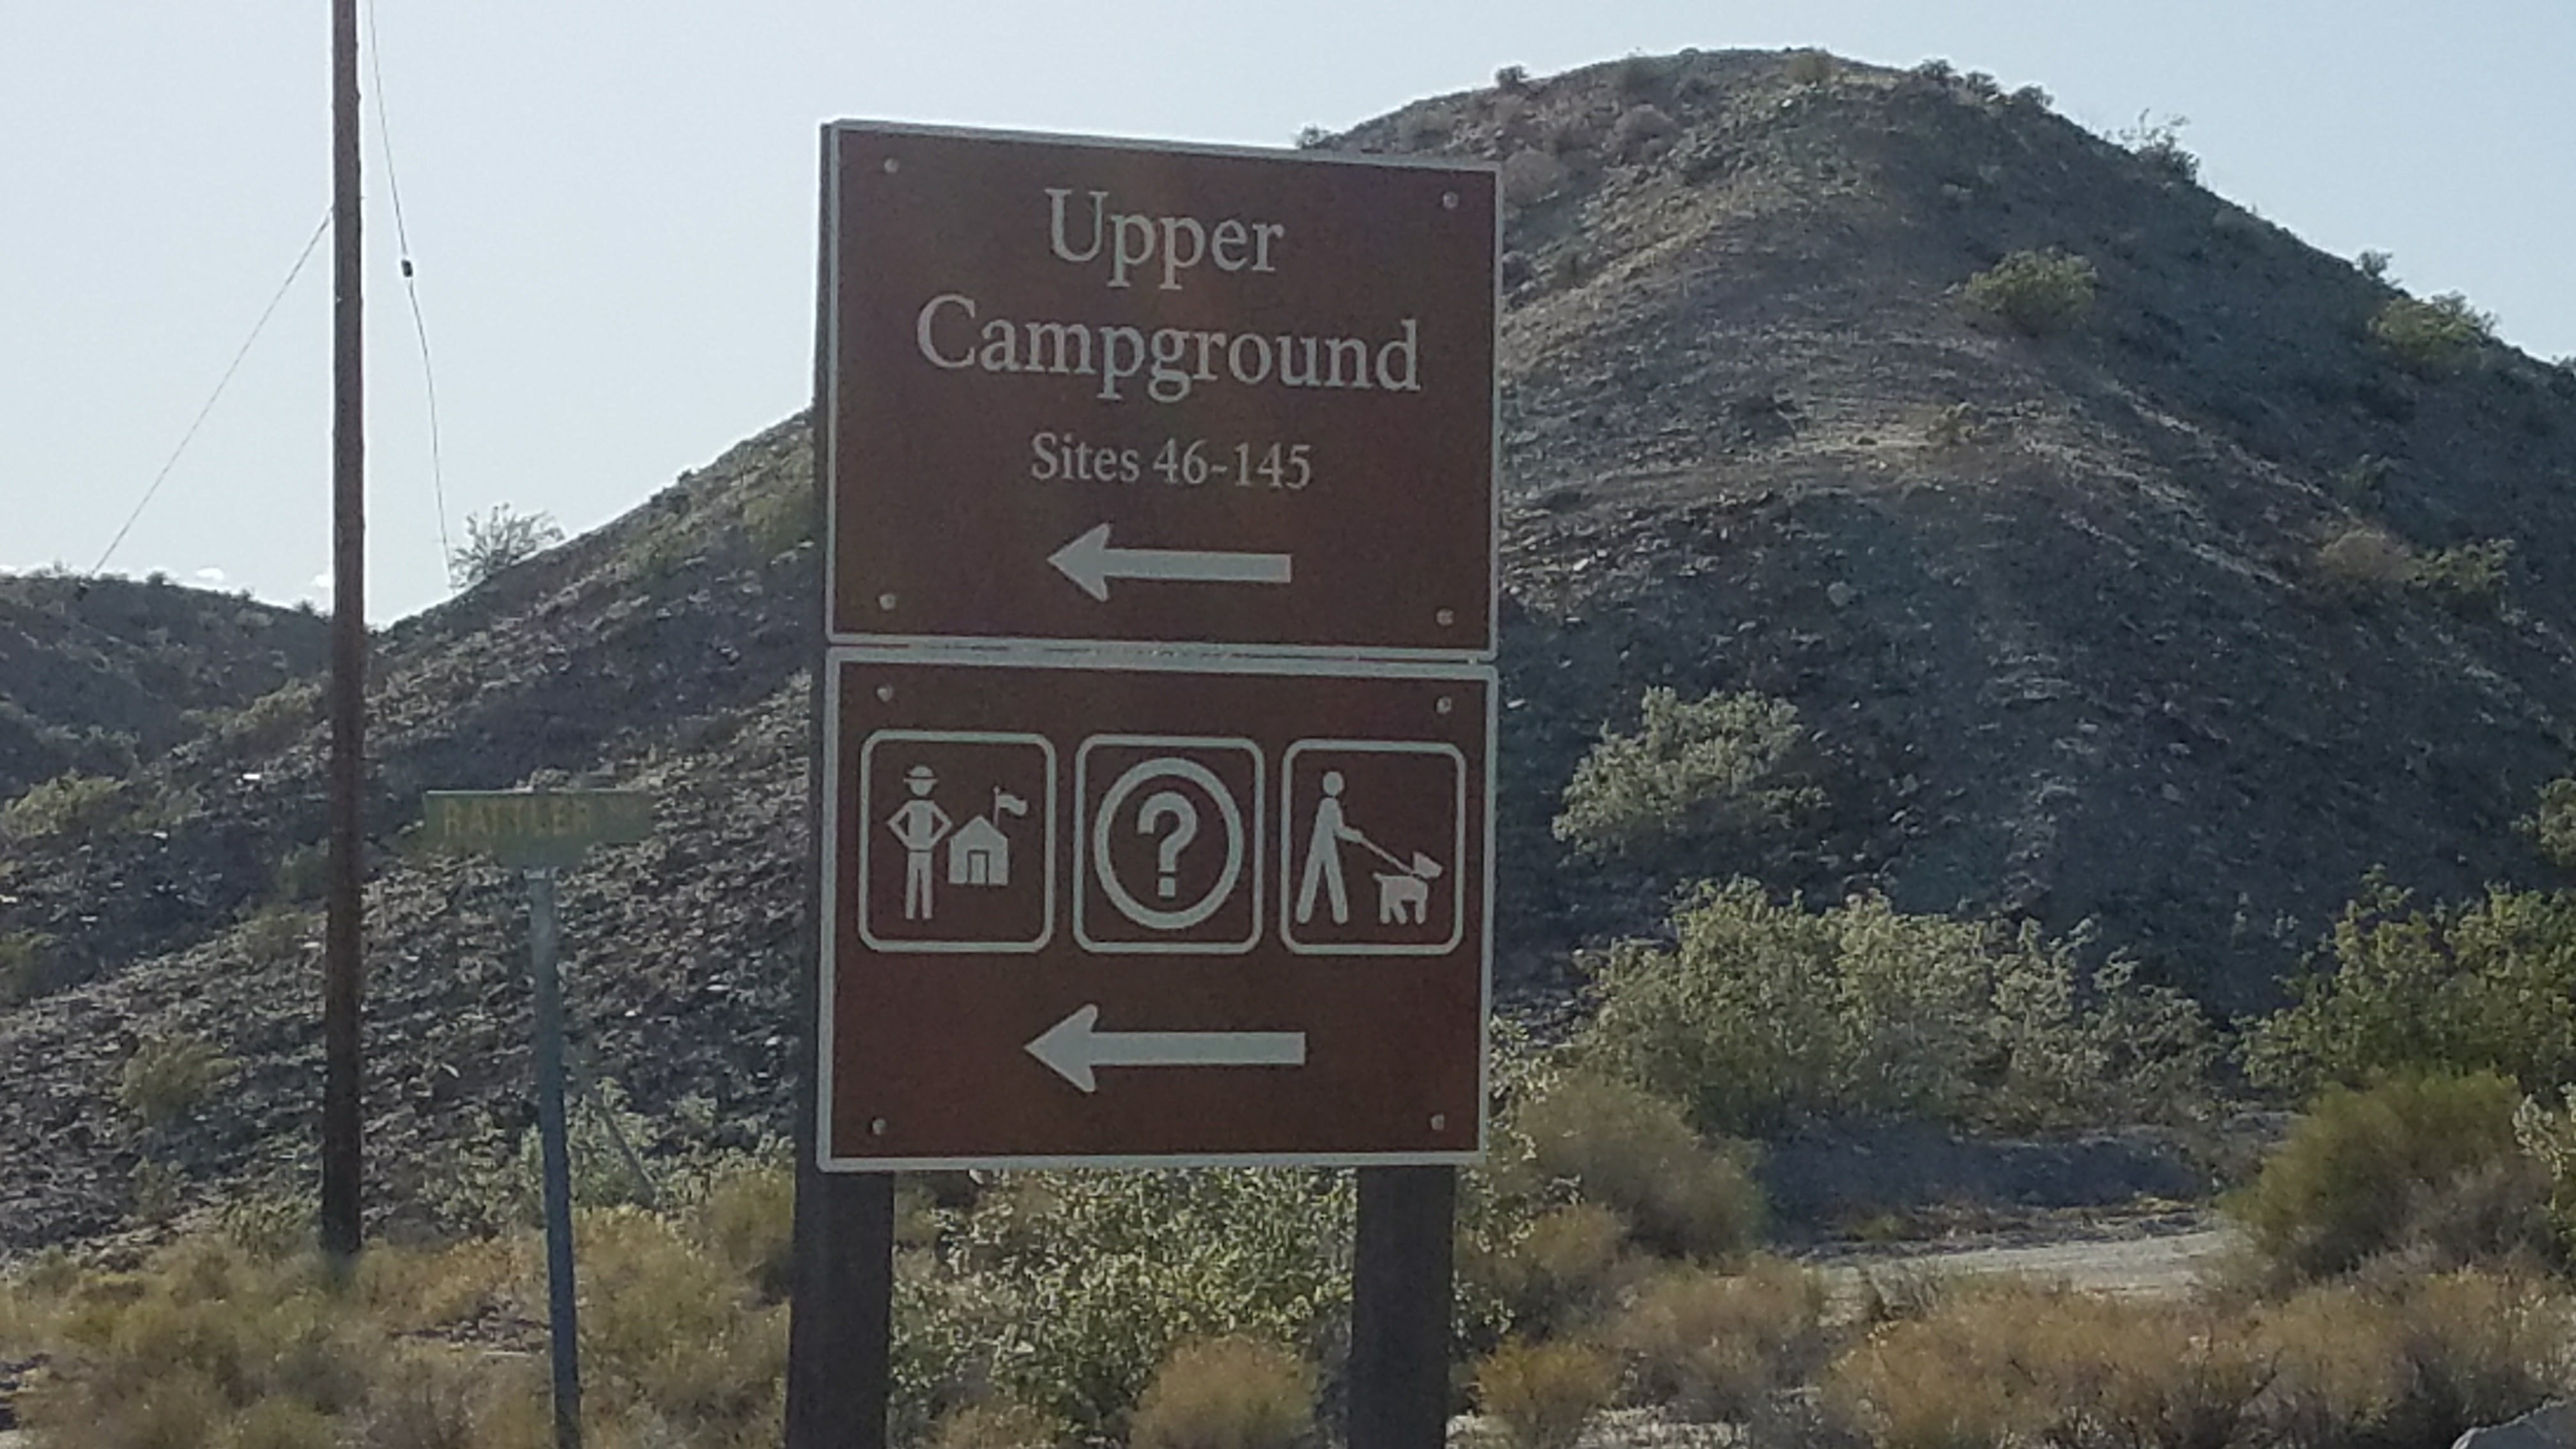 Entrance to Upper Campground & RV dump station